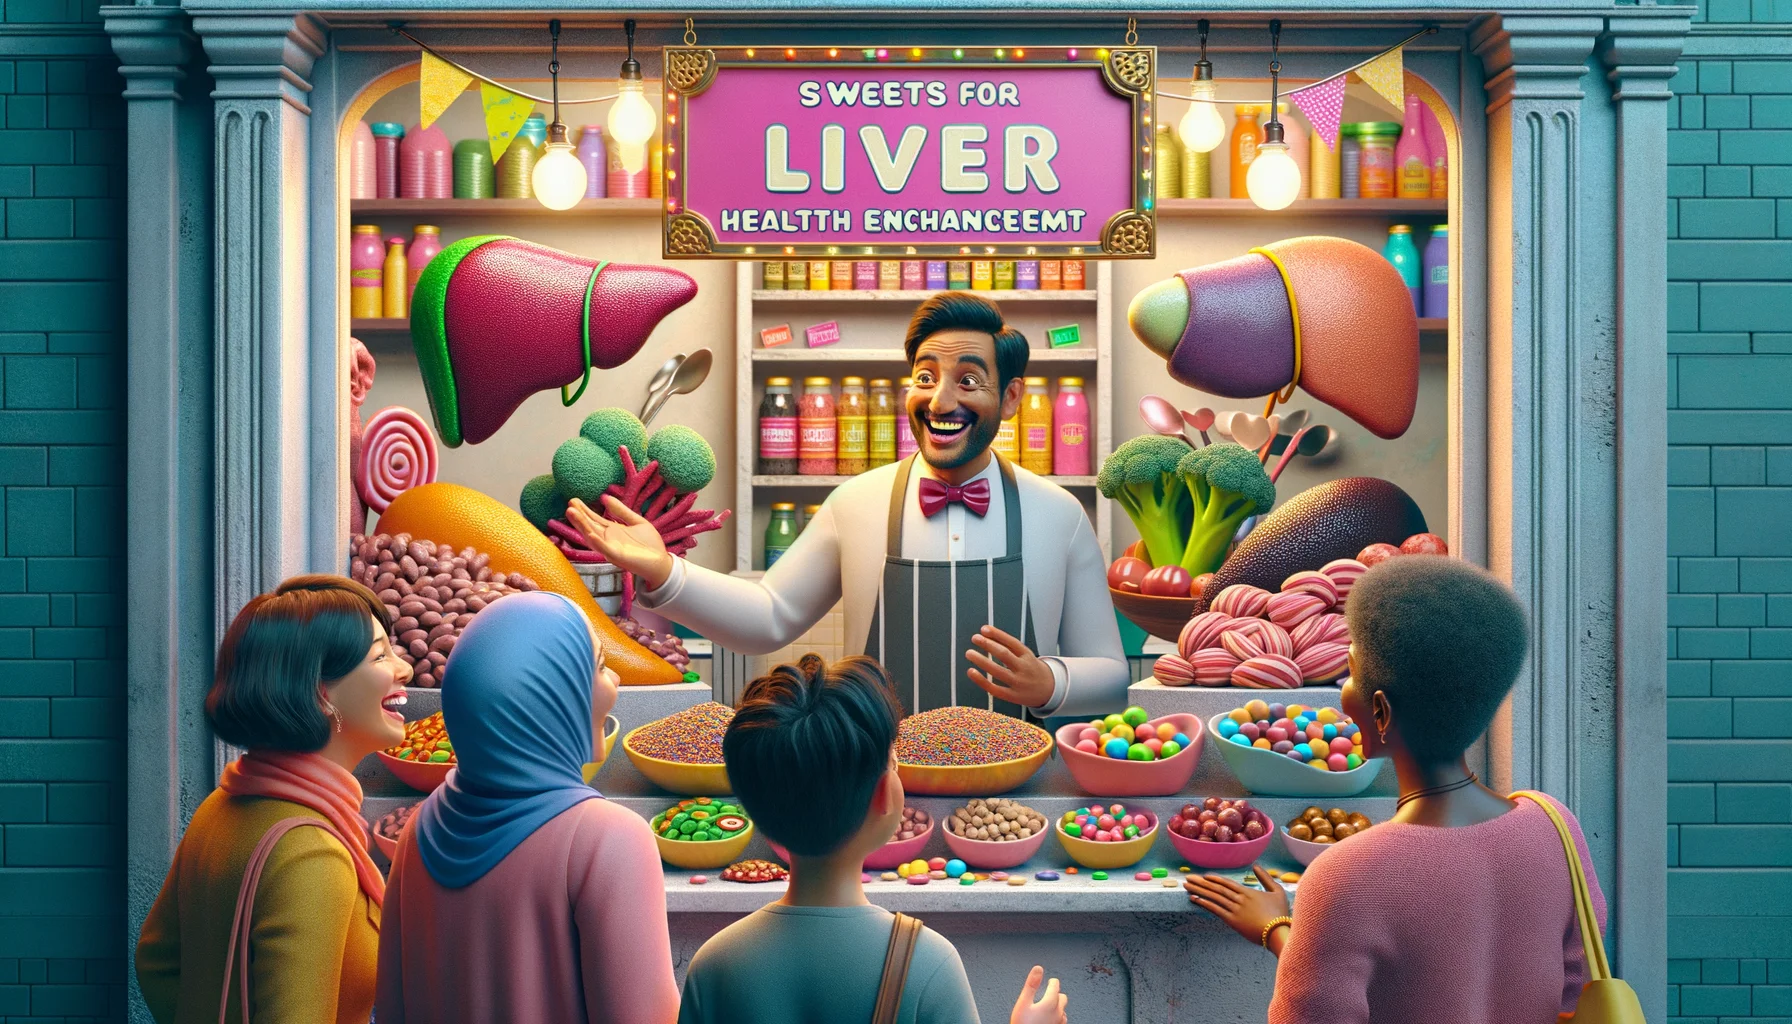 Imagine a whimsical yet realistic scenario in a brightly-lit candy shop. The sign above the entrance reads, 'Sweets for Liver Health Enhancement.' A smiling South Asian male shopkeeper is behind the counter, showing a variety of colorful, imaginative candies crafted into funny shapes of liver and healthy foods like broccoli, beets, and nuts. Customers of different genders and descents, like a Middle-Eastern woman and a Caucasian boy, are laughing and pointing at the candies with excitement. There is a sense of positive energy and humor that fills the air, making it an enticing scene.